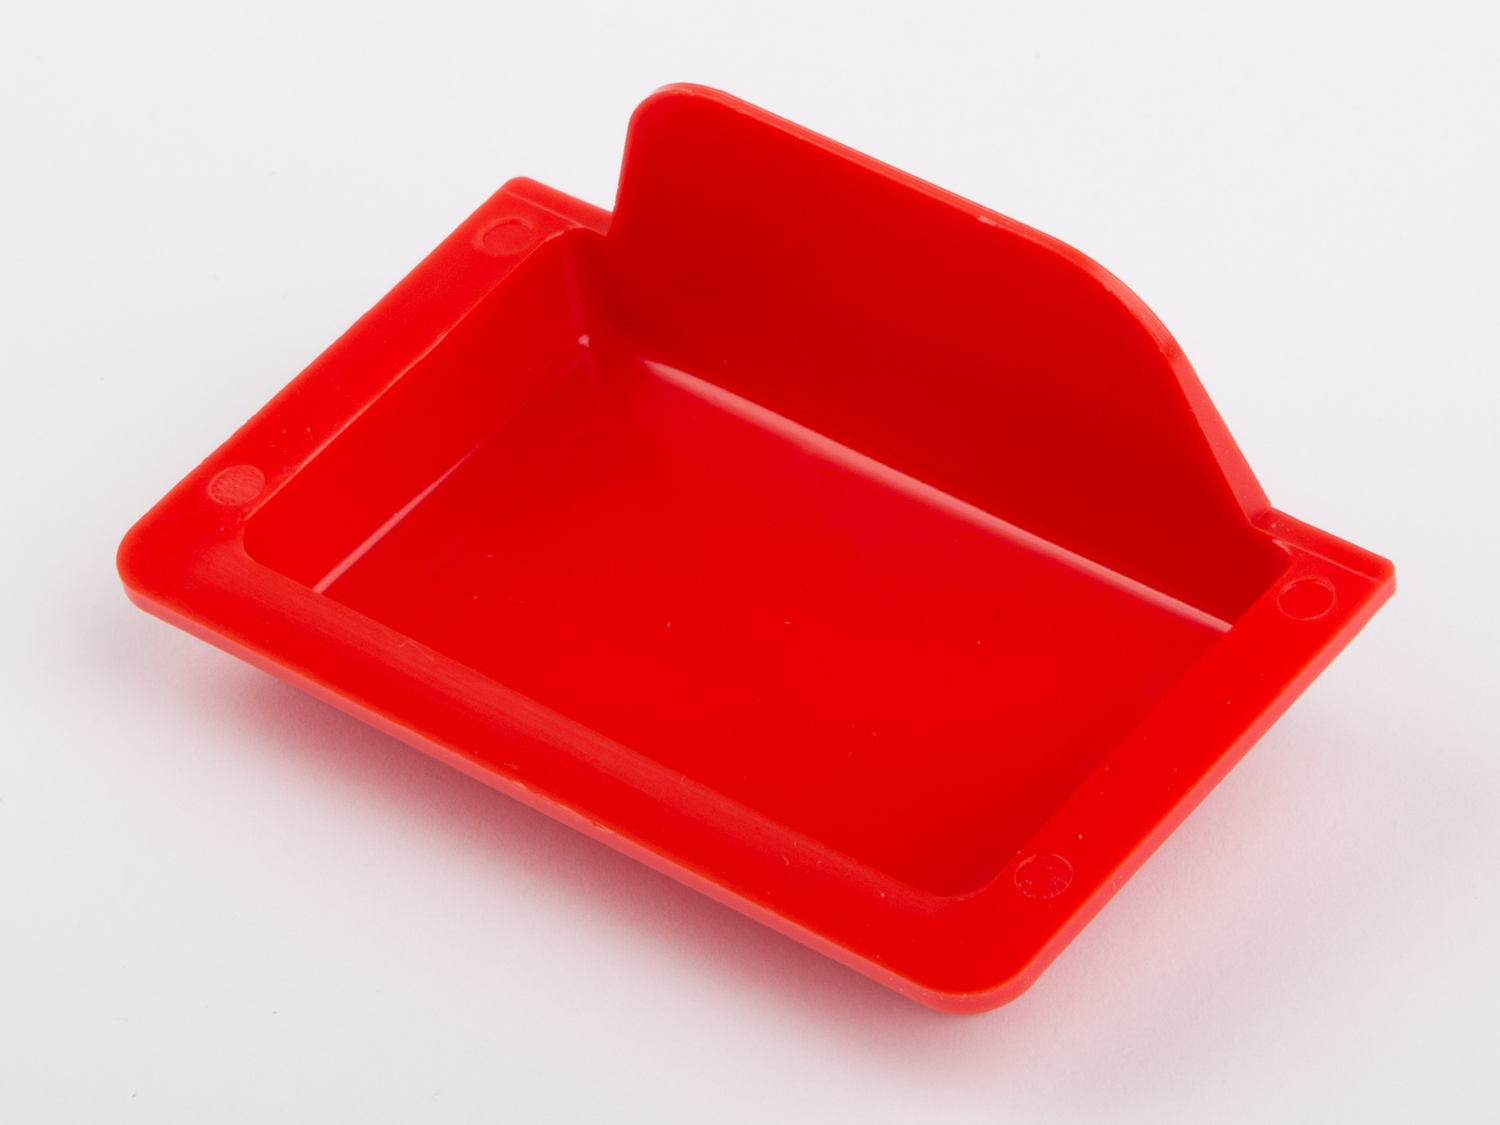 Condensed water tray D11, D16 (until 2001), D20 and D22 (until 2002), D24, T125